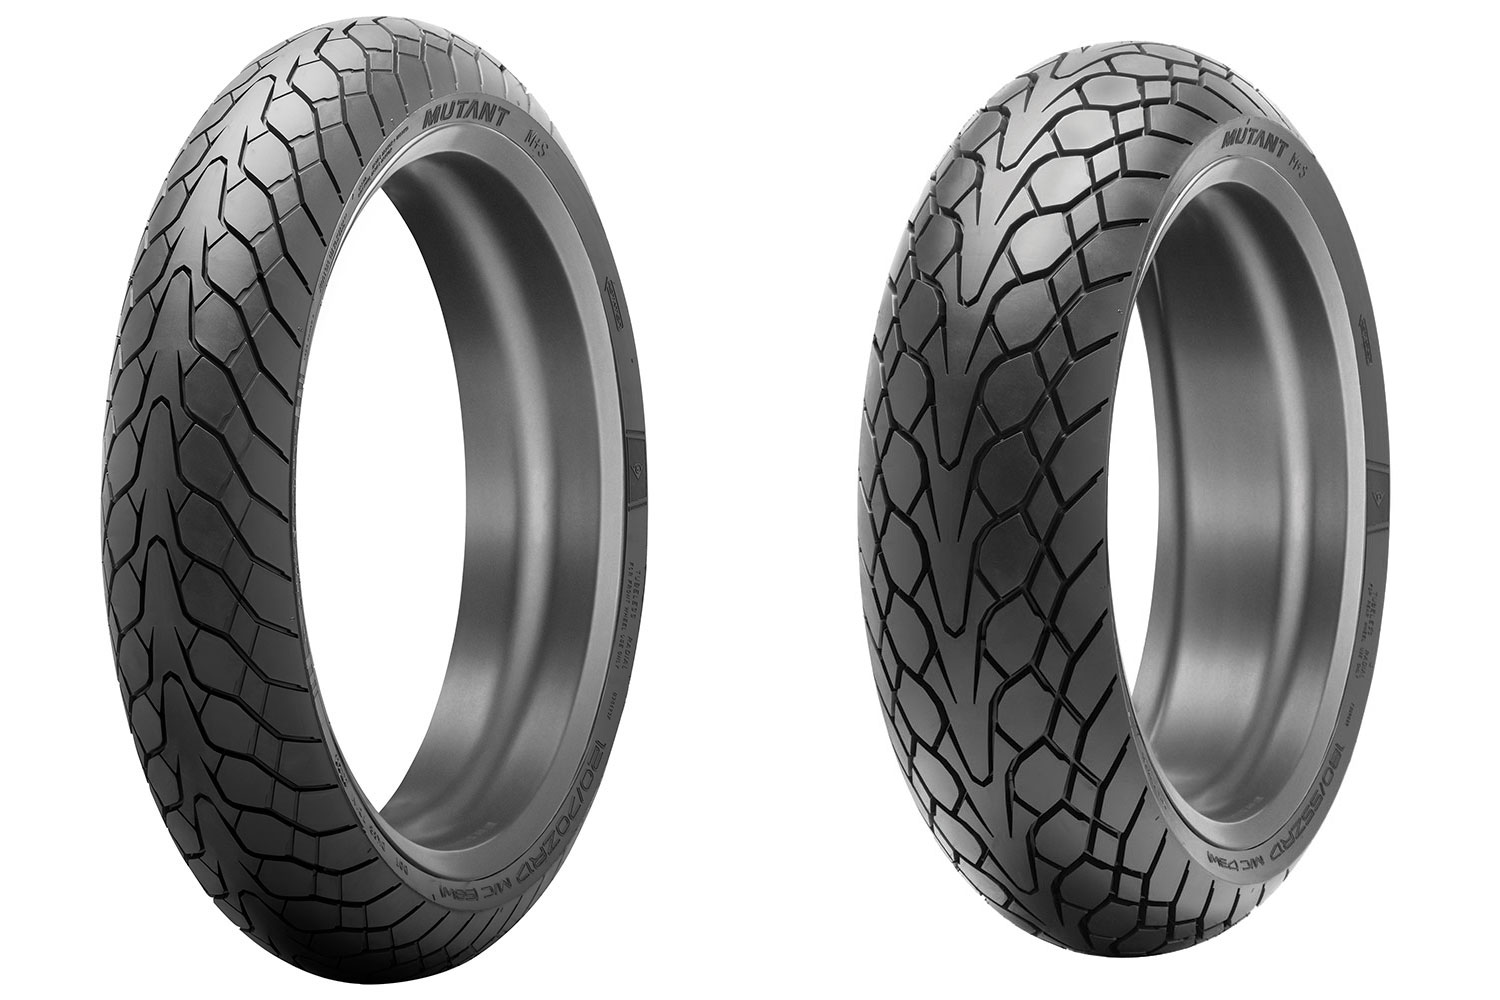 https://ridermagazine.com/wp-content/uploads/2022/06/Dunlop-Mutant-Tires-front-and-rear.jpg